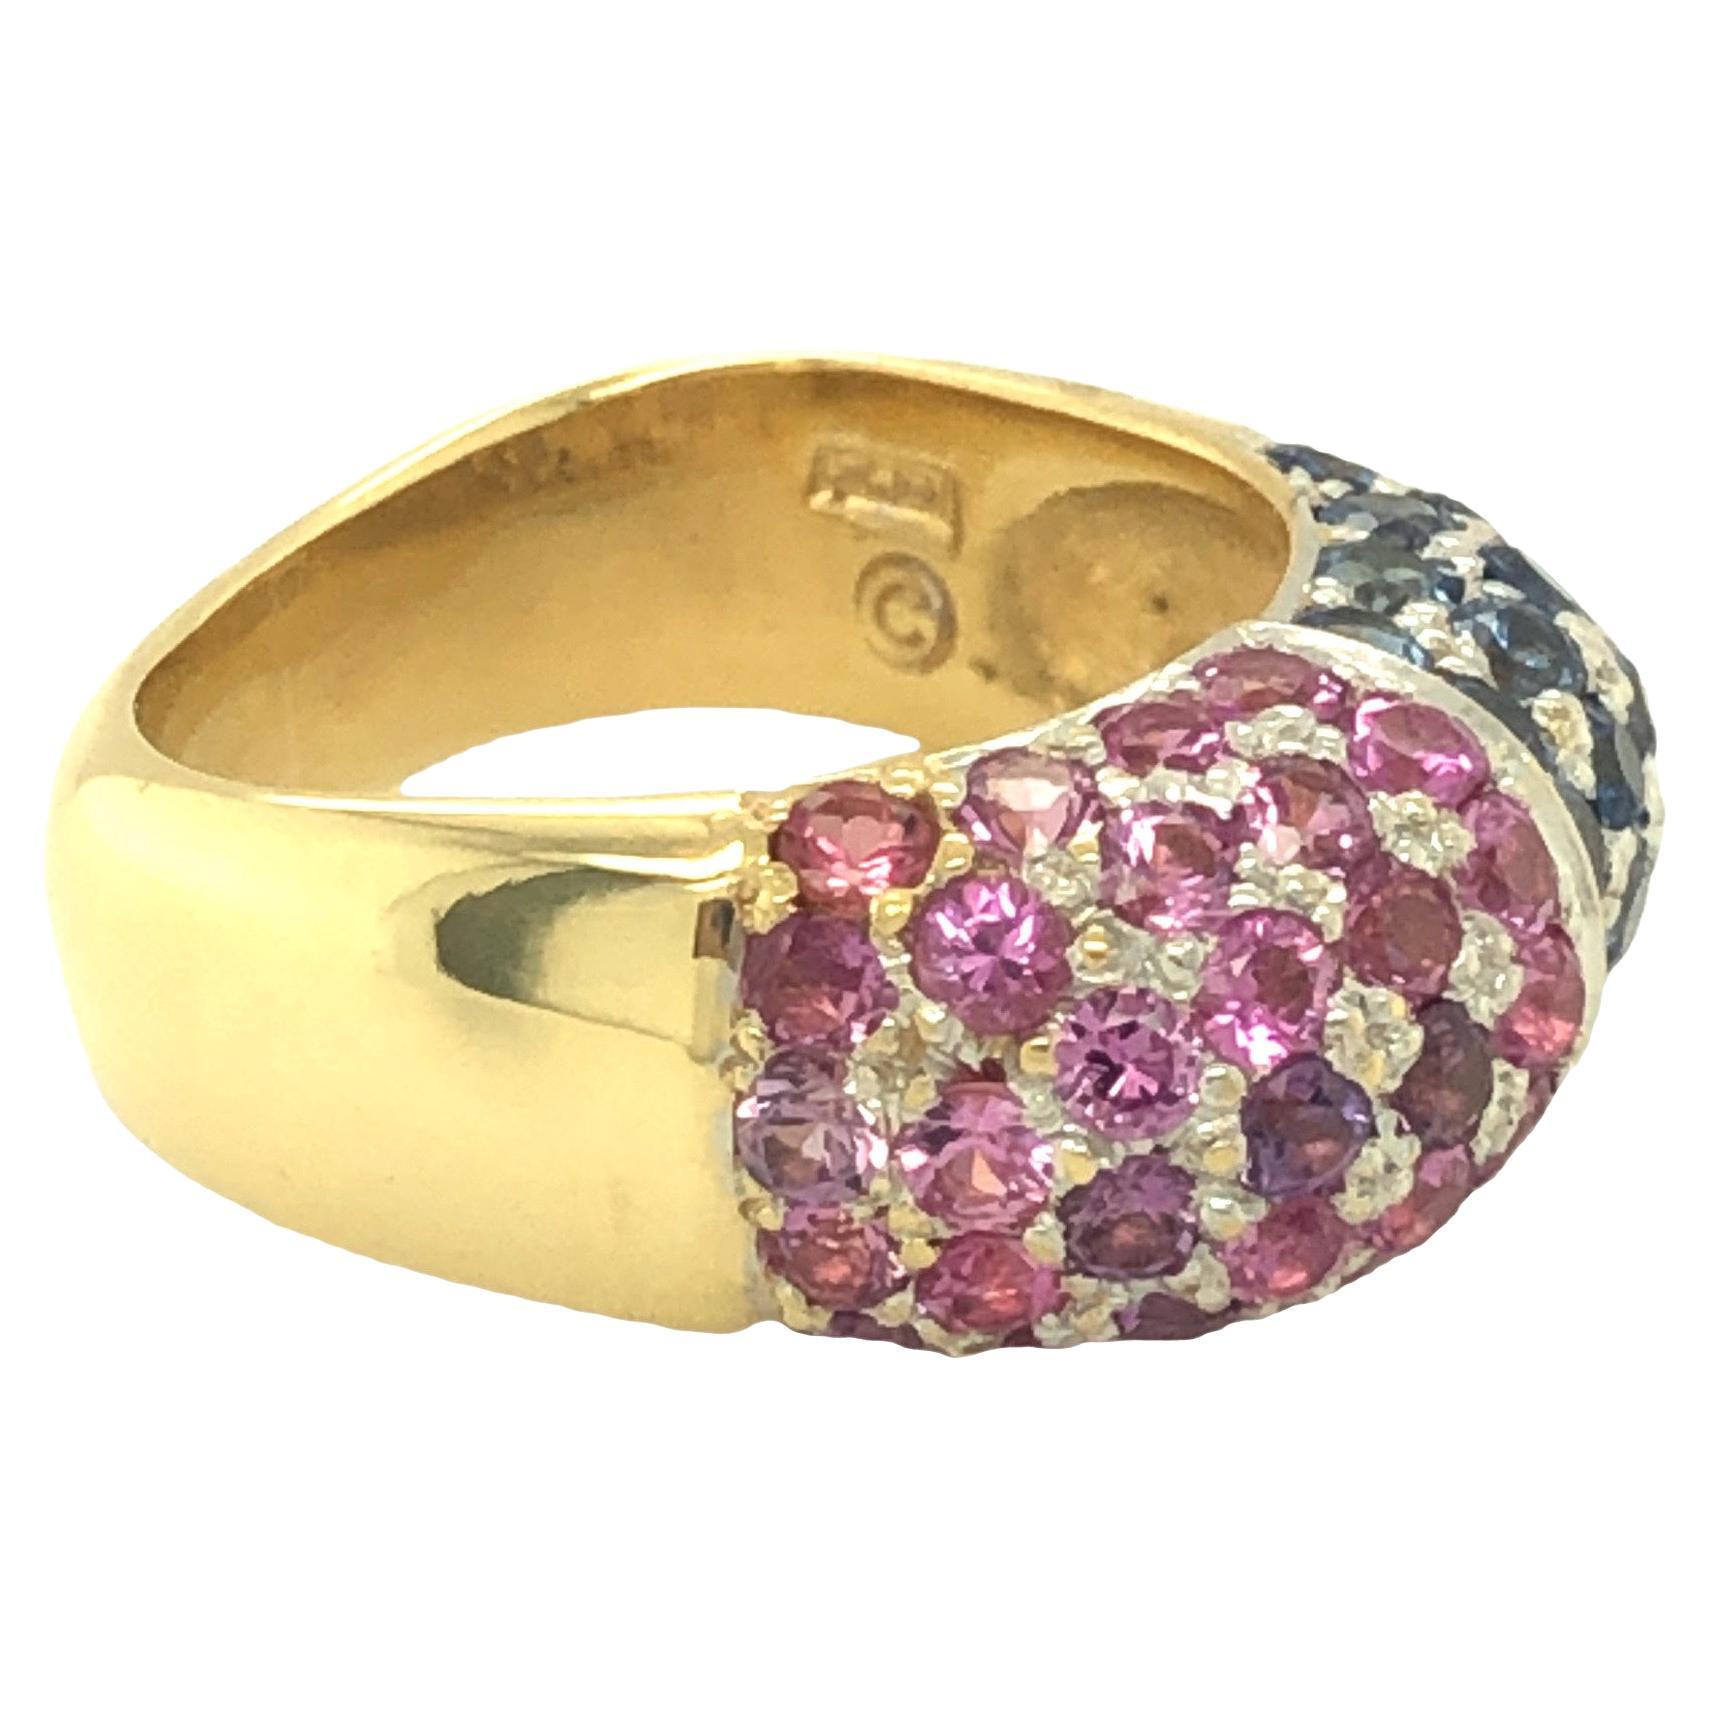 This exquisite and one-of-a-kind ring showcases a harmonious blend of round-cut sapphire and pink sapphire, with a combined weight of approximately 3.60 carats. The ring features a comfortable, rounded-square band and is meticulously crafted in 18K